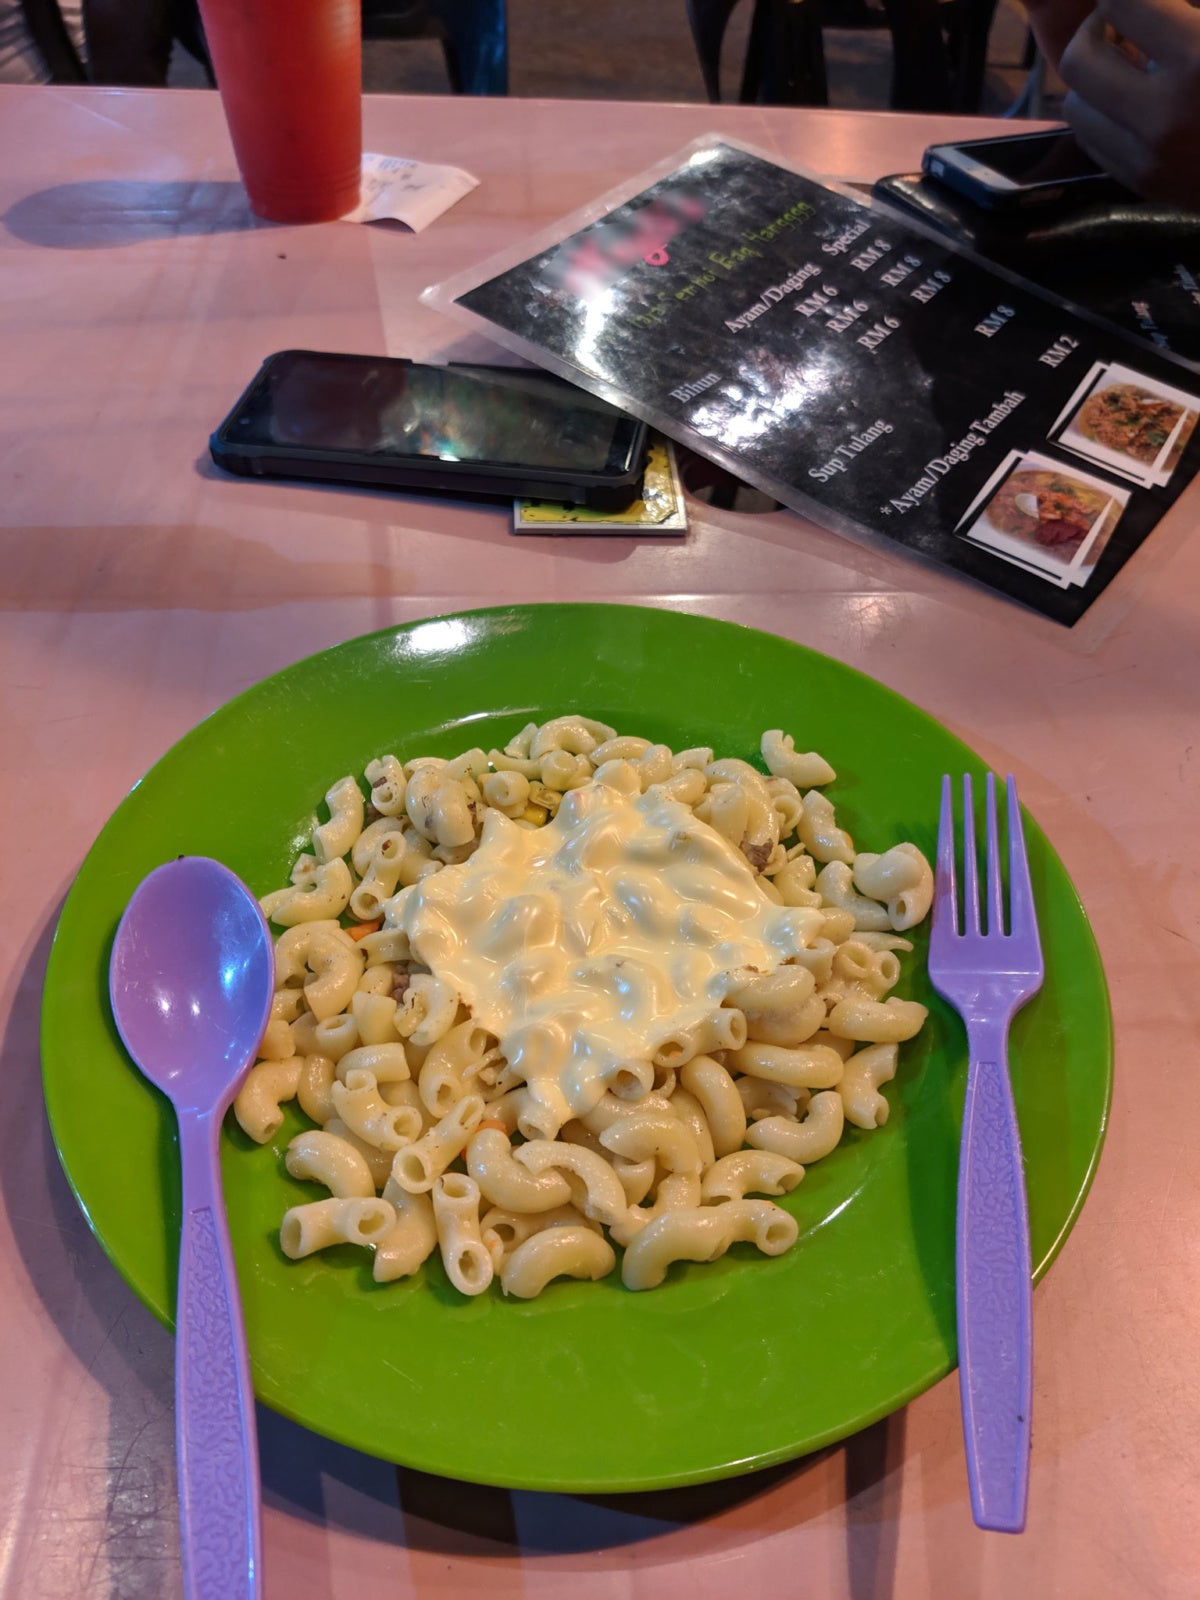 M'sian Man Orders RM5 Mac & Cheese From Stall, Gets Served Plate of Sadness - WORLD OF BUZZ